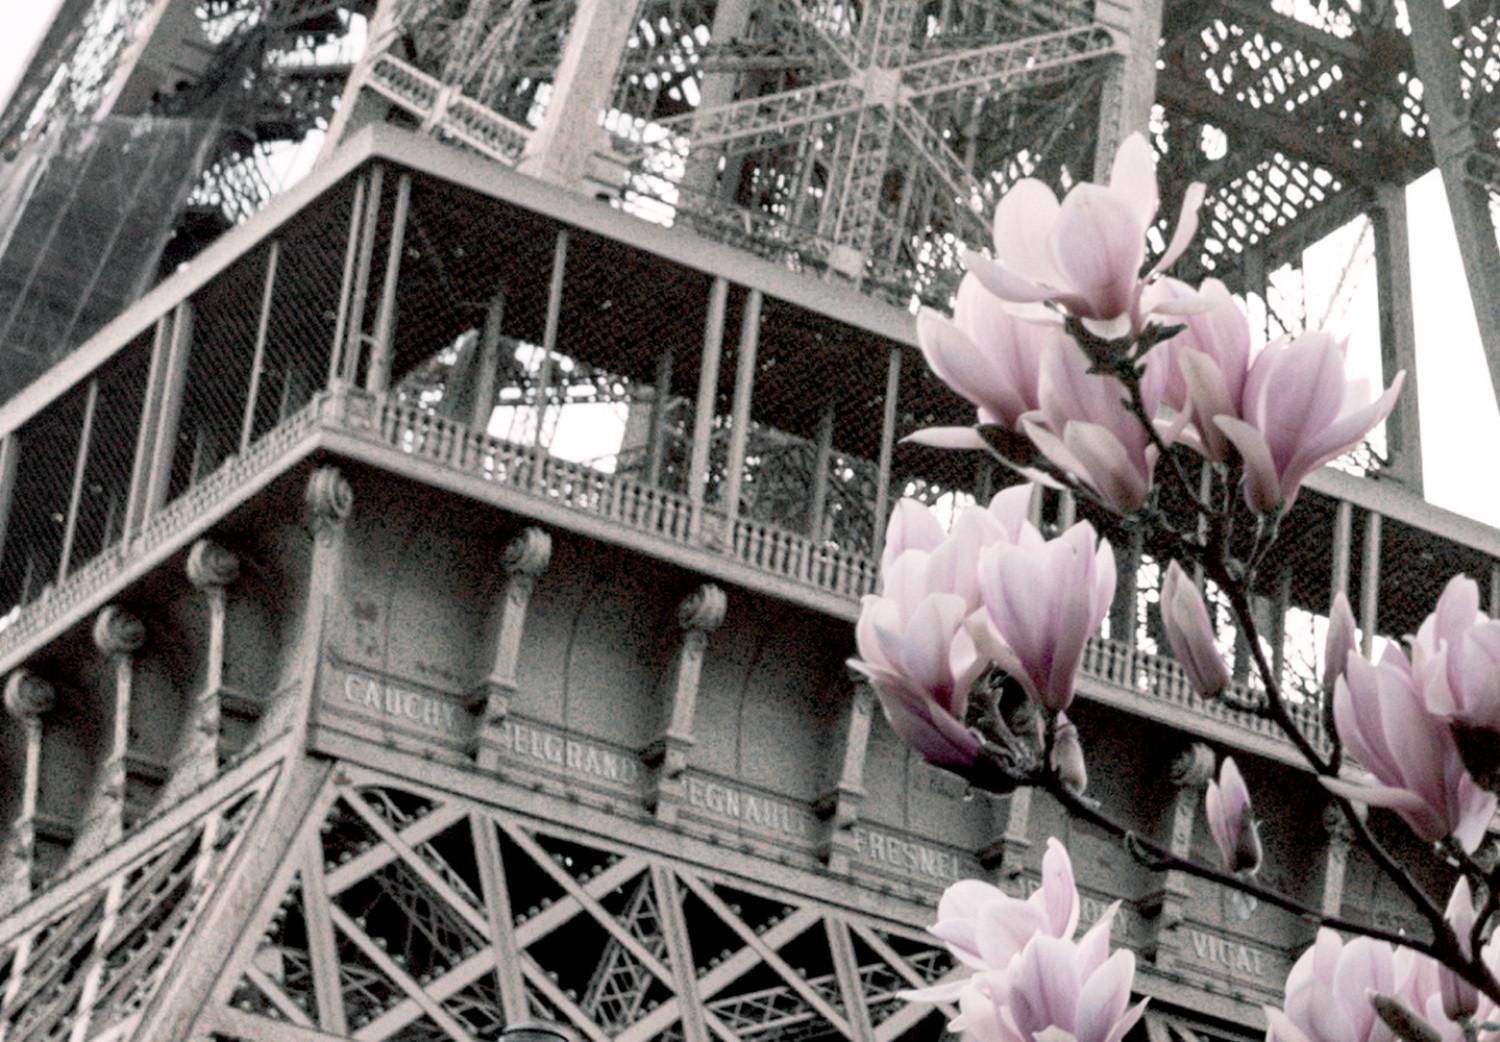 Poster Magnolias in the Sun of Paris - pink flowers against the gray backdrop of the Eiffel Tower